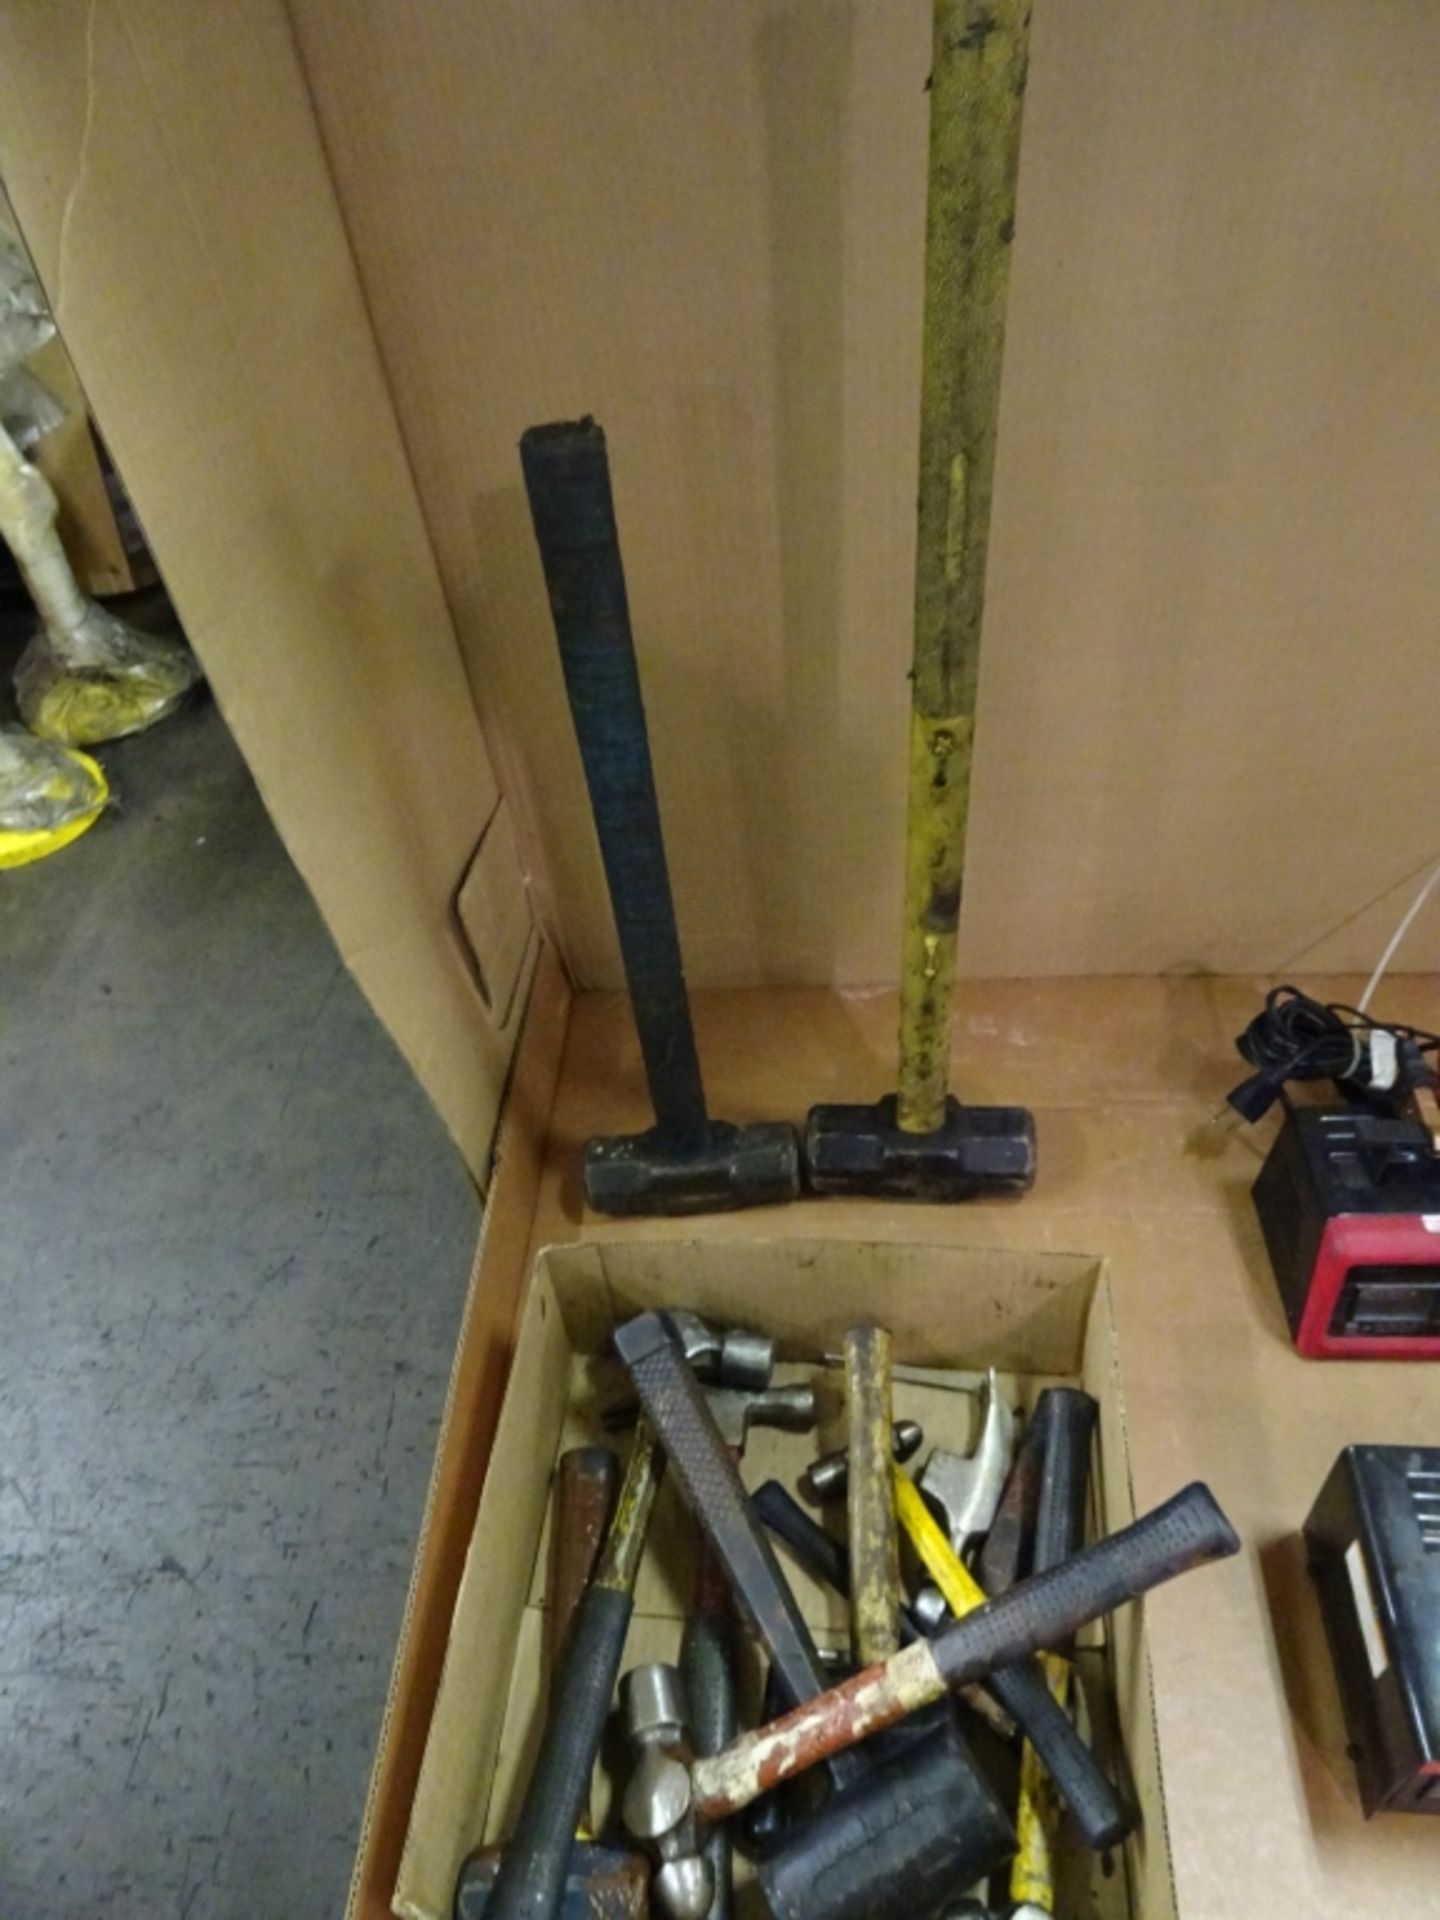 Lot Box of Various Hammers Including Ball Peen Hammer, Claw Hammer, Sledge Hammers, Deadblow